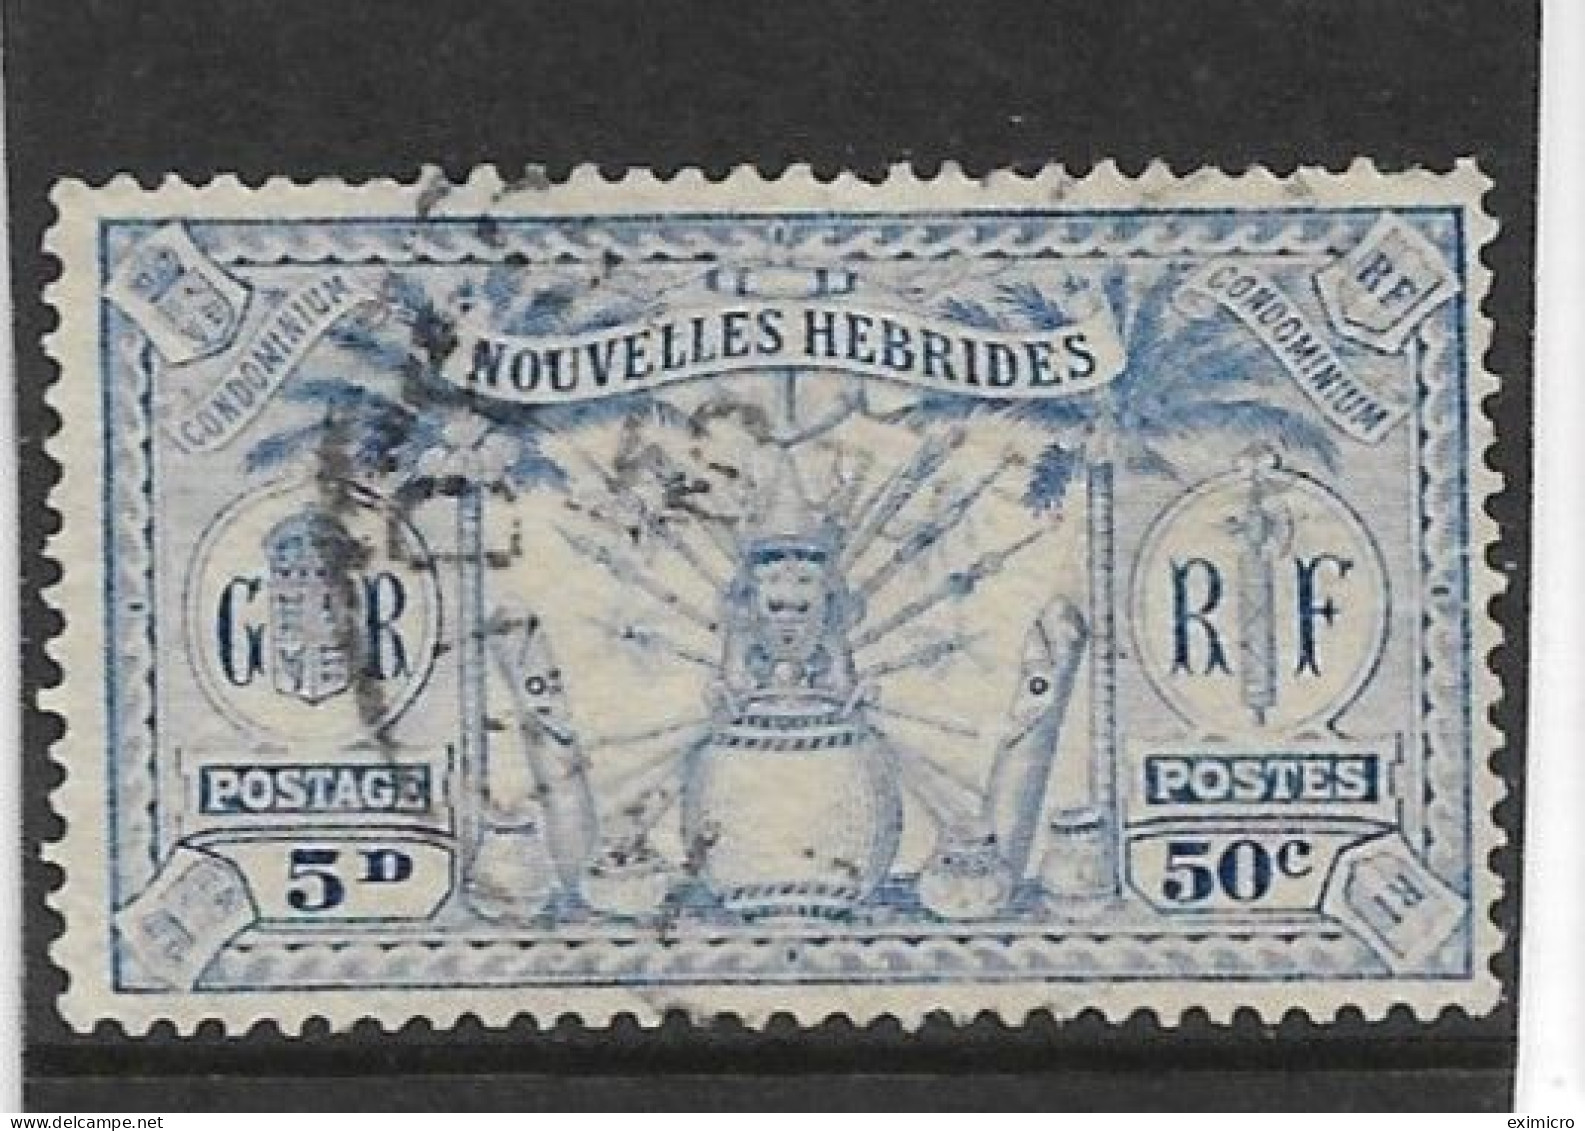 NEW HEBRIDES (FRENCH CURRENCY) 1925 50c (5d) SG F48 FINE USED Cat £3 - Usati